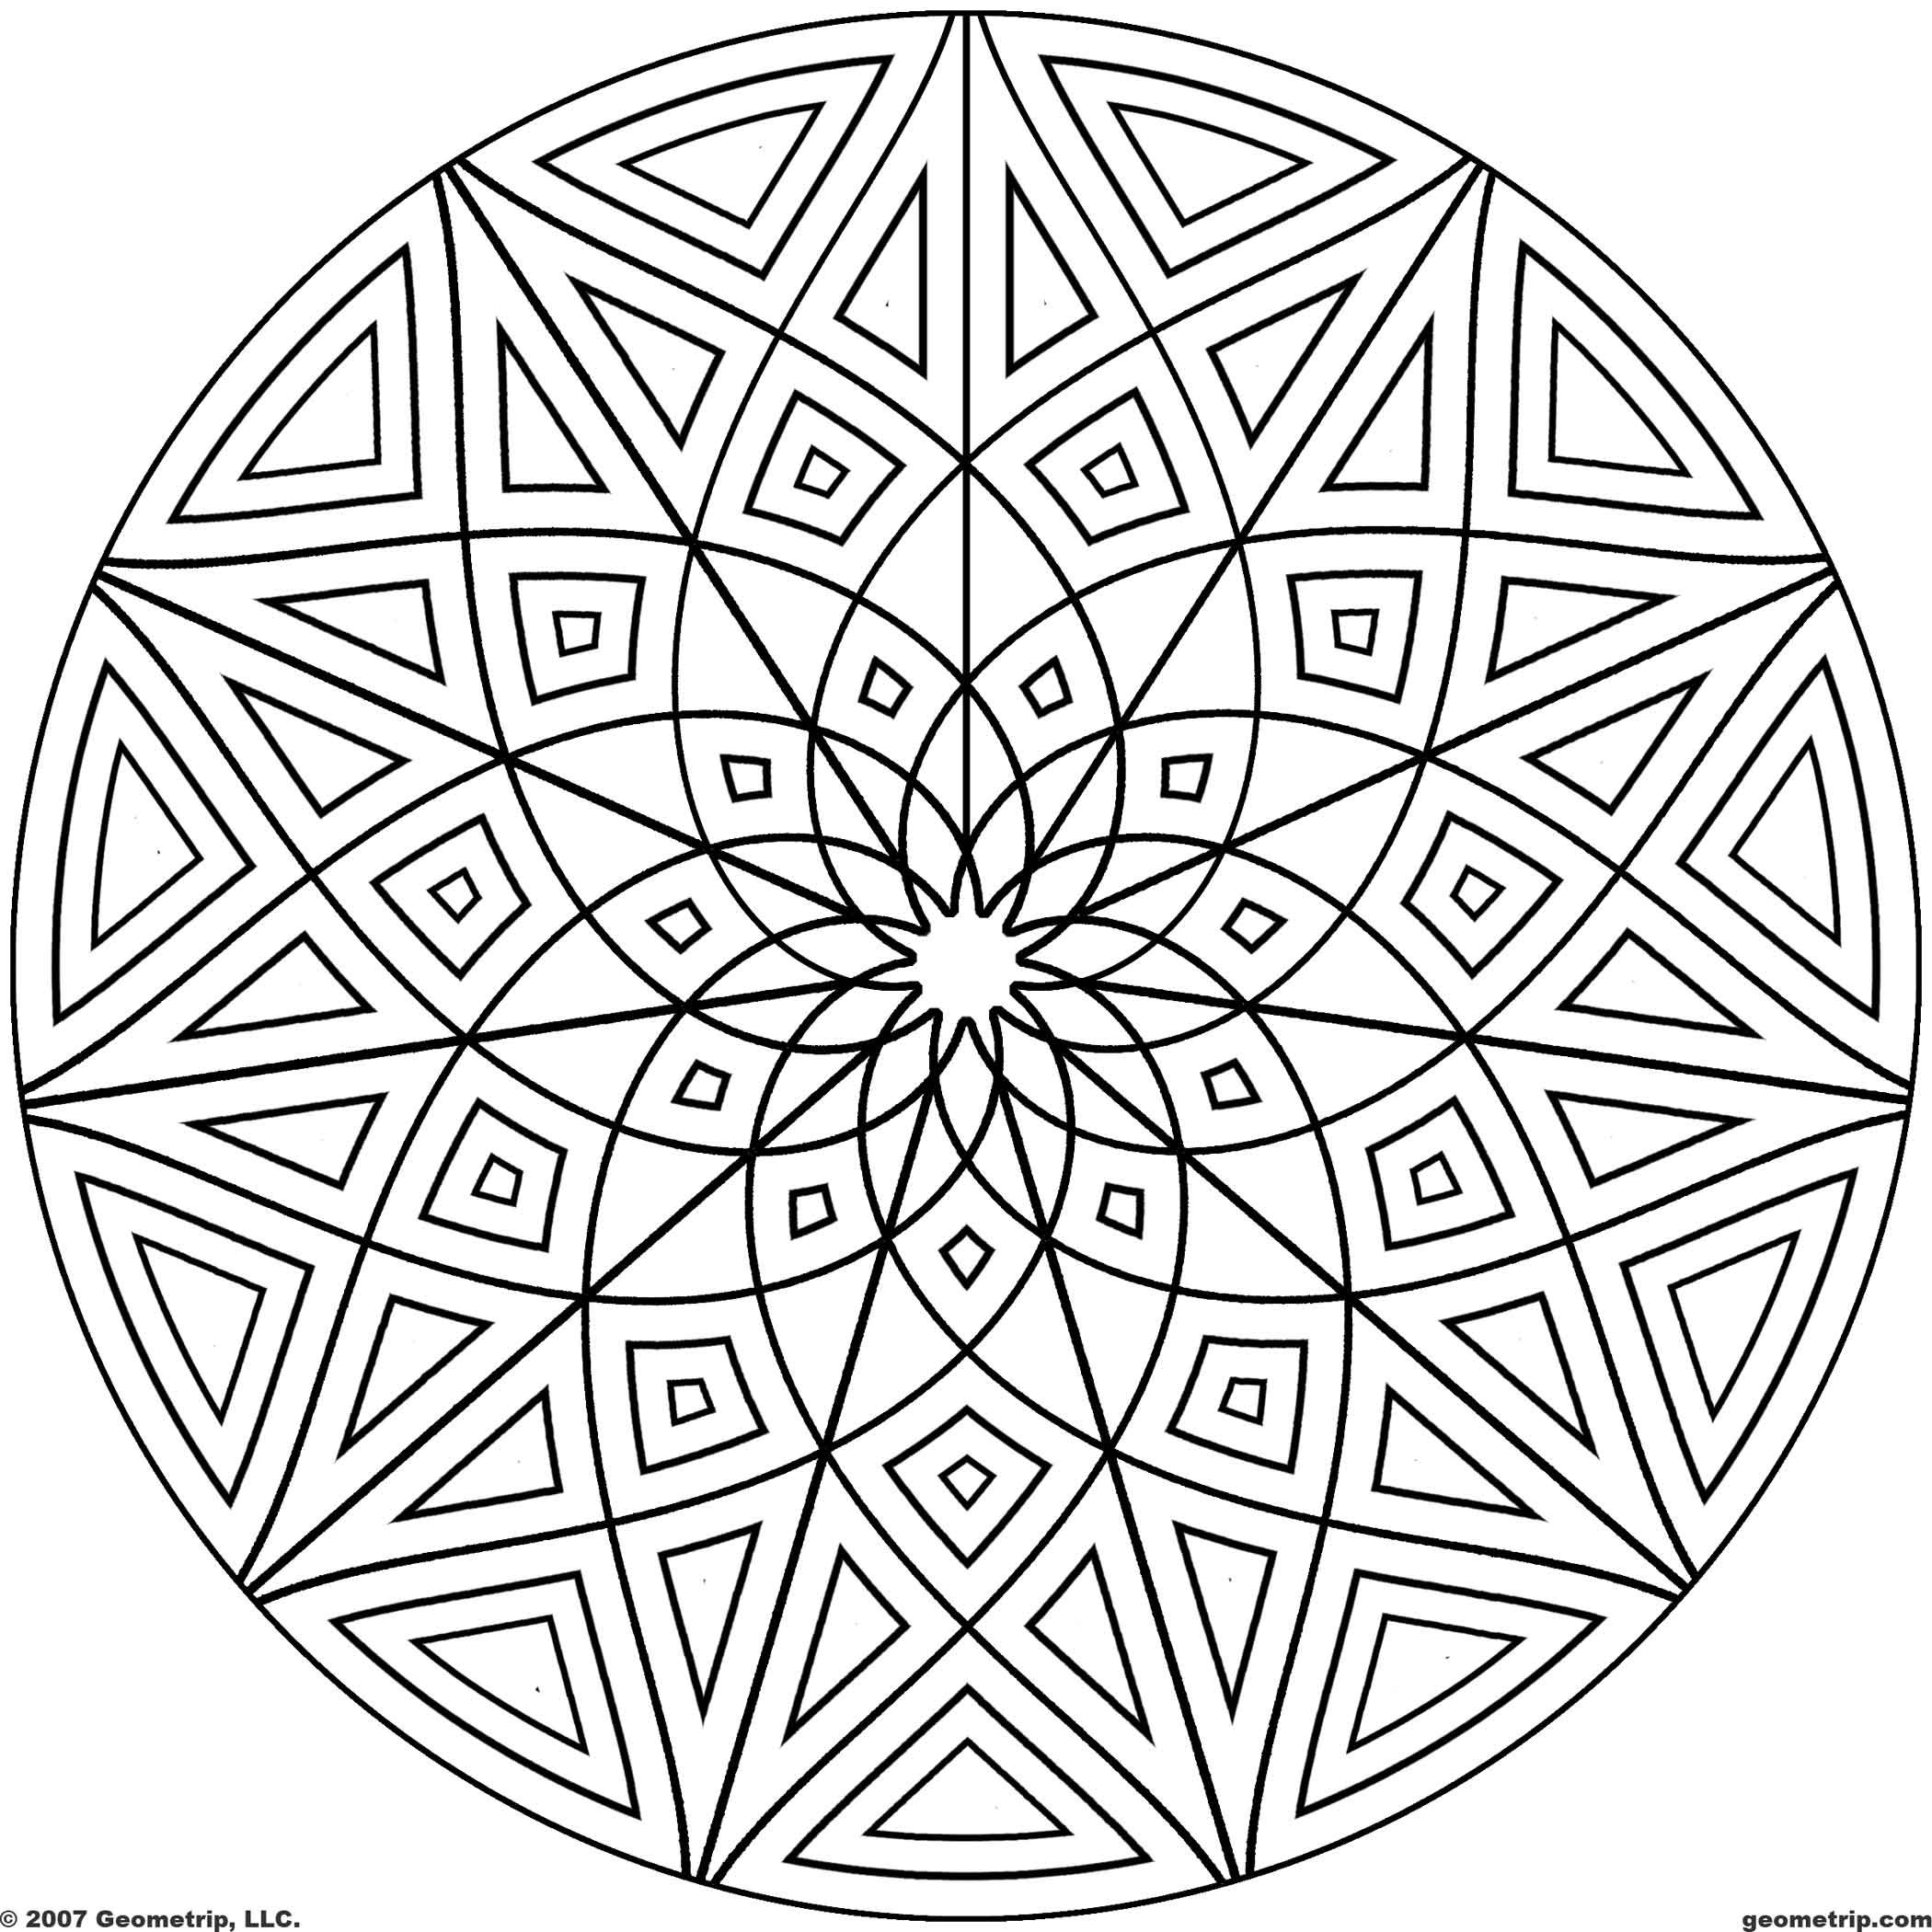 Geometric Coloring Page Cool Geometric Coloring Pages At Getdrawings Free For Personal